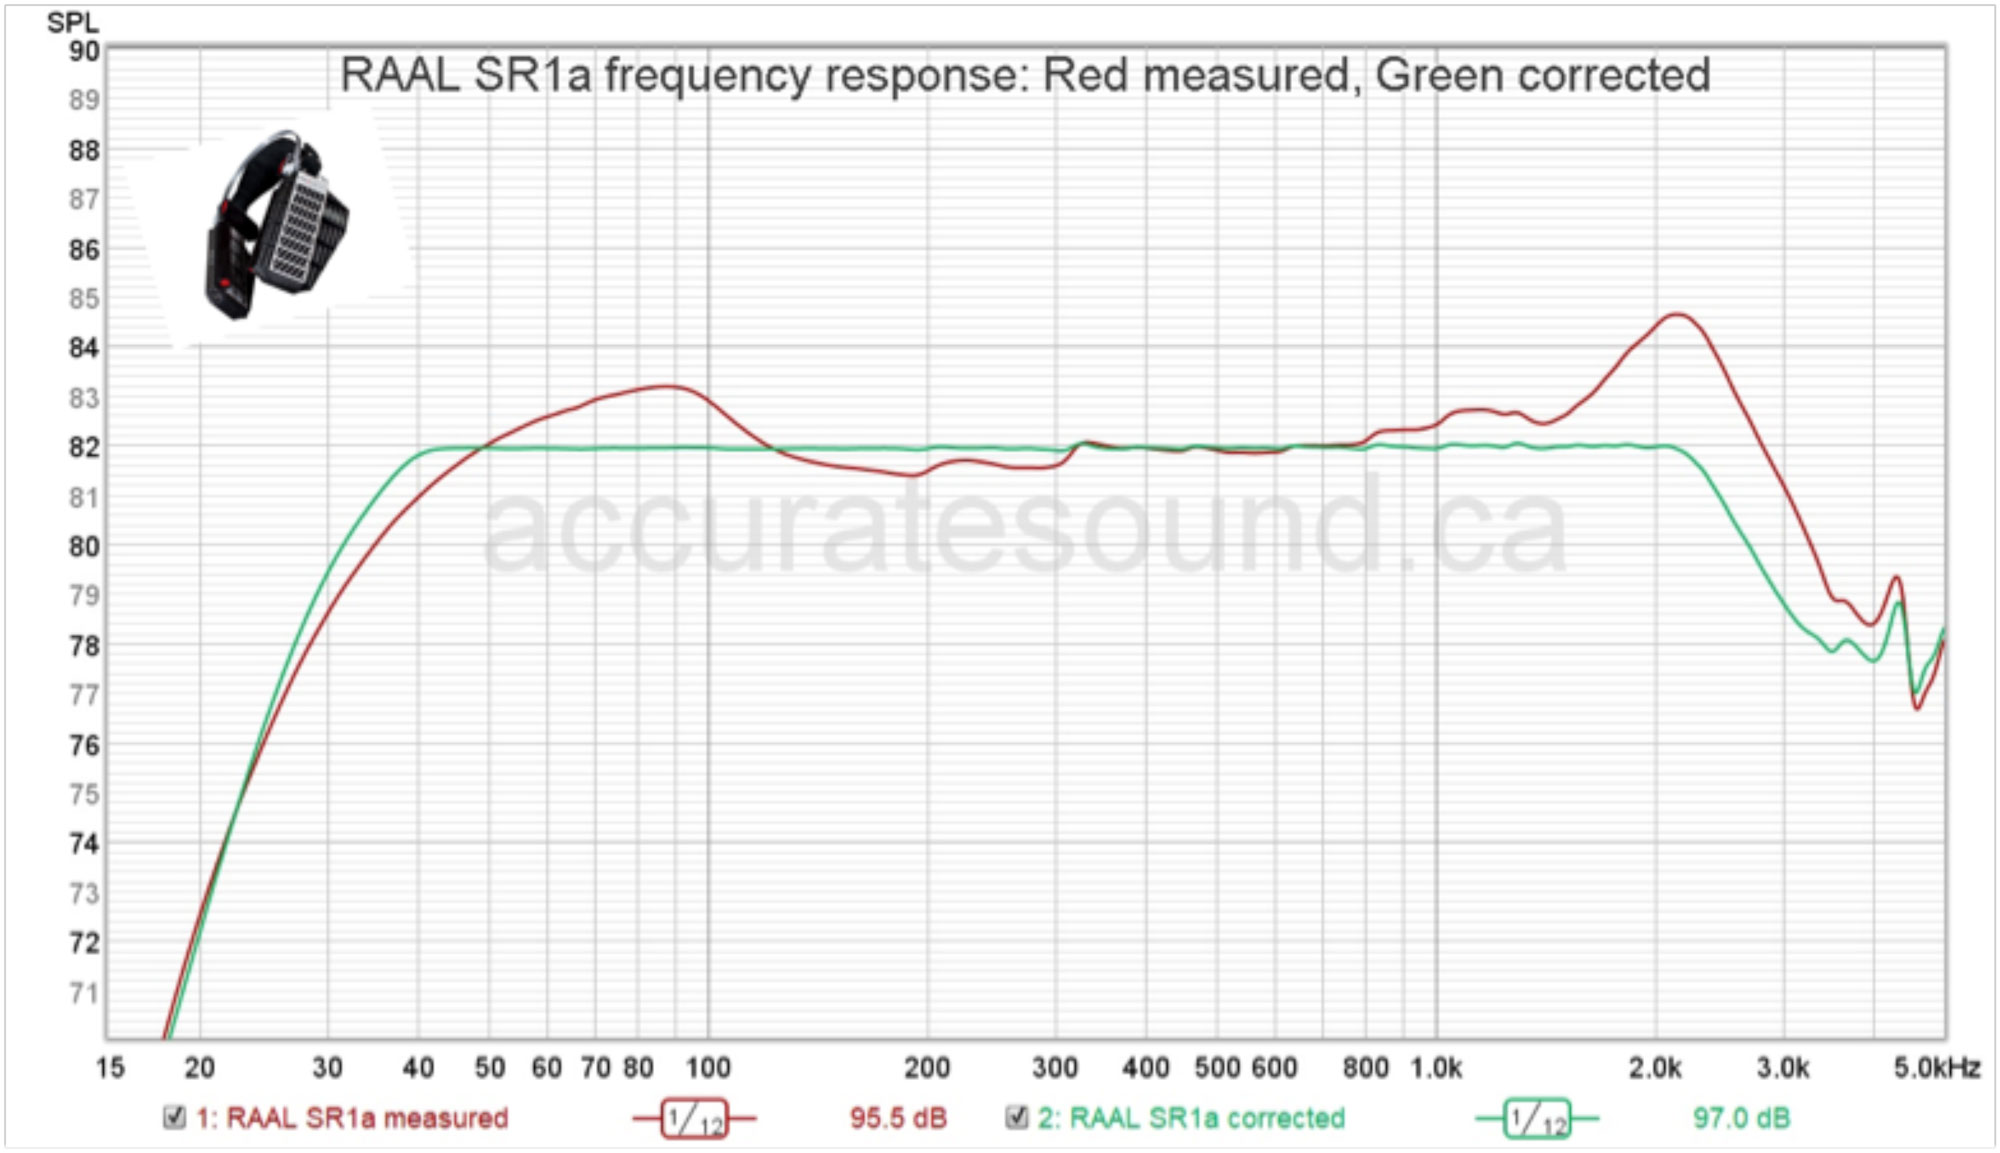 RAAL requisite SR1a frequency